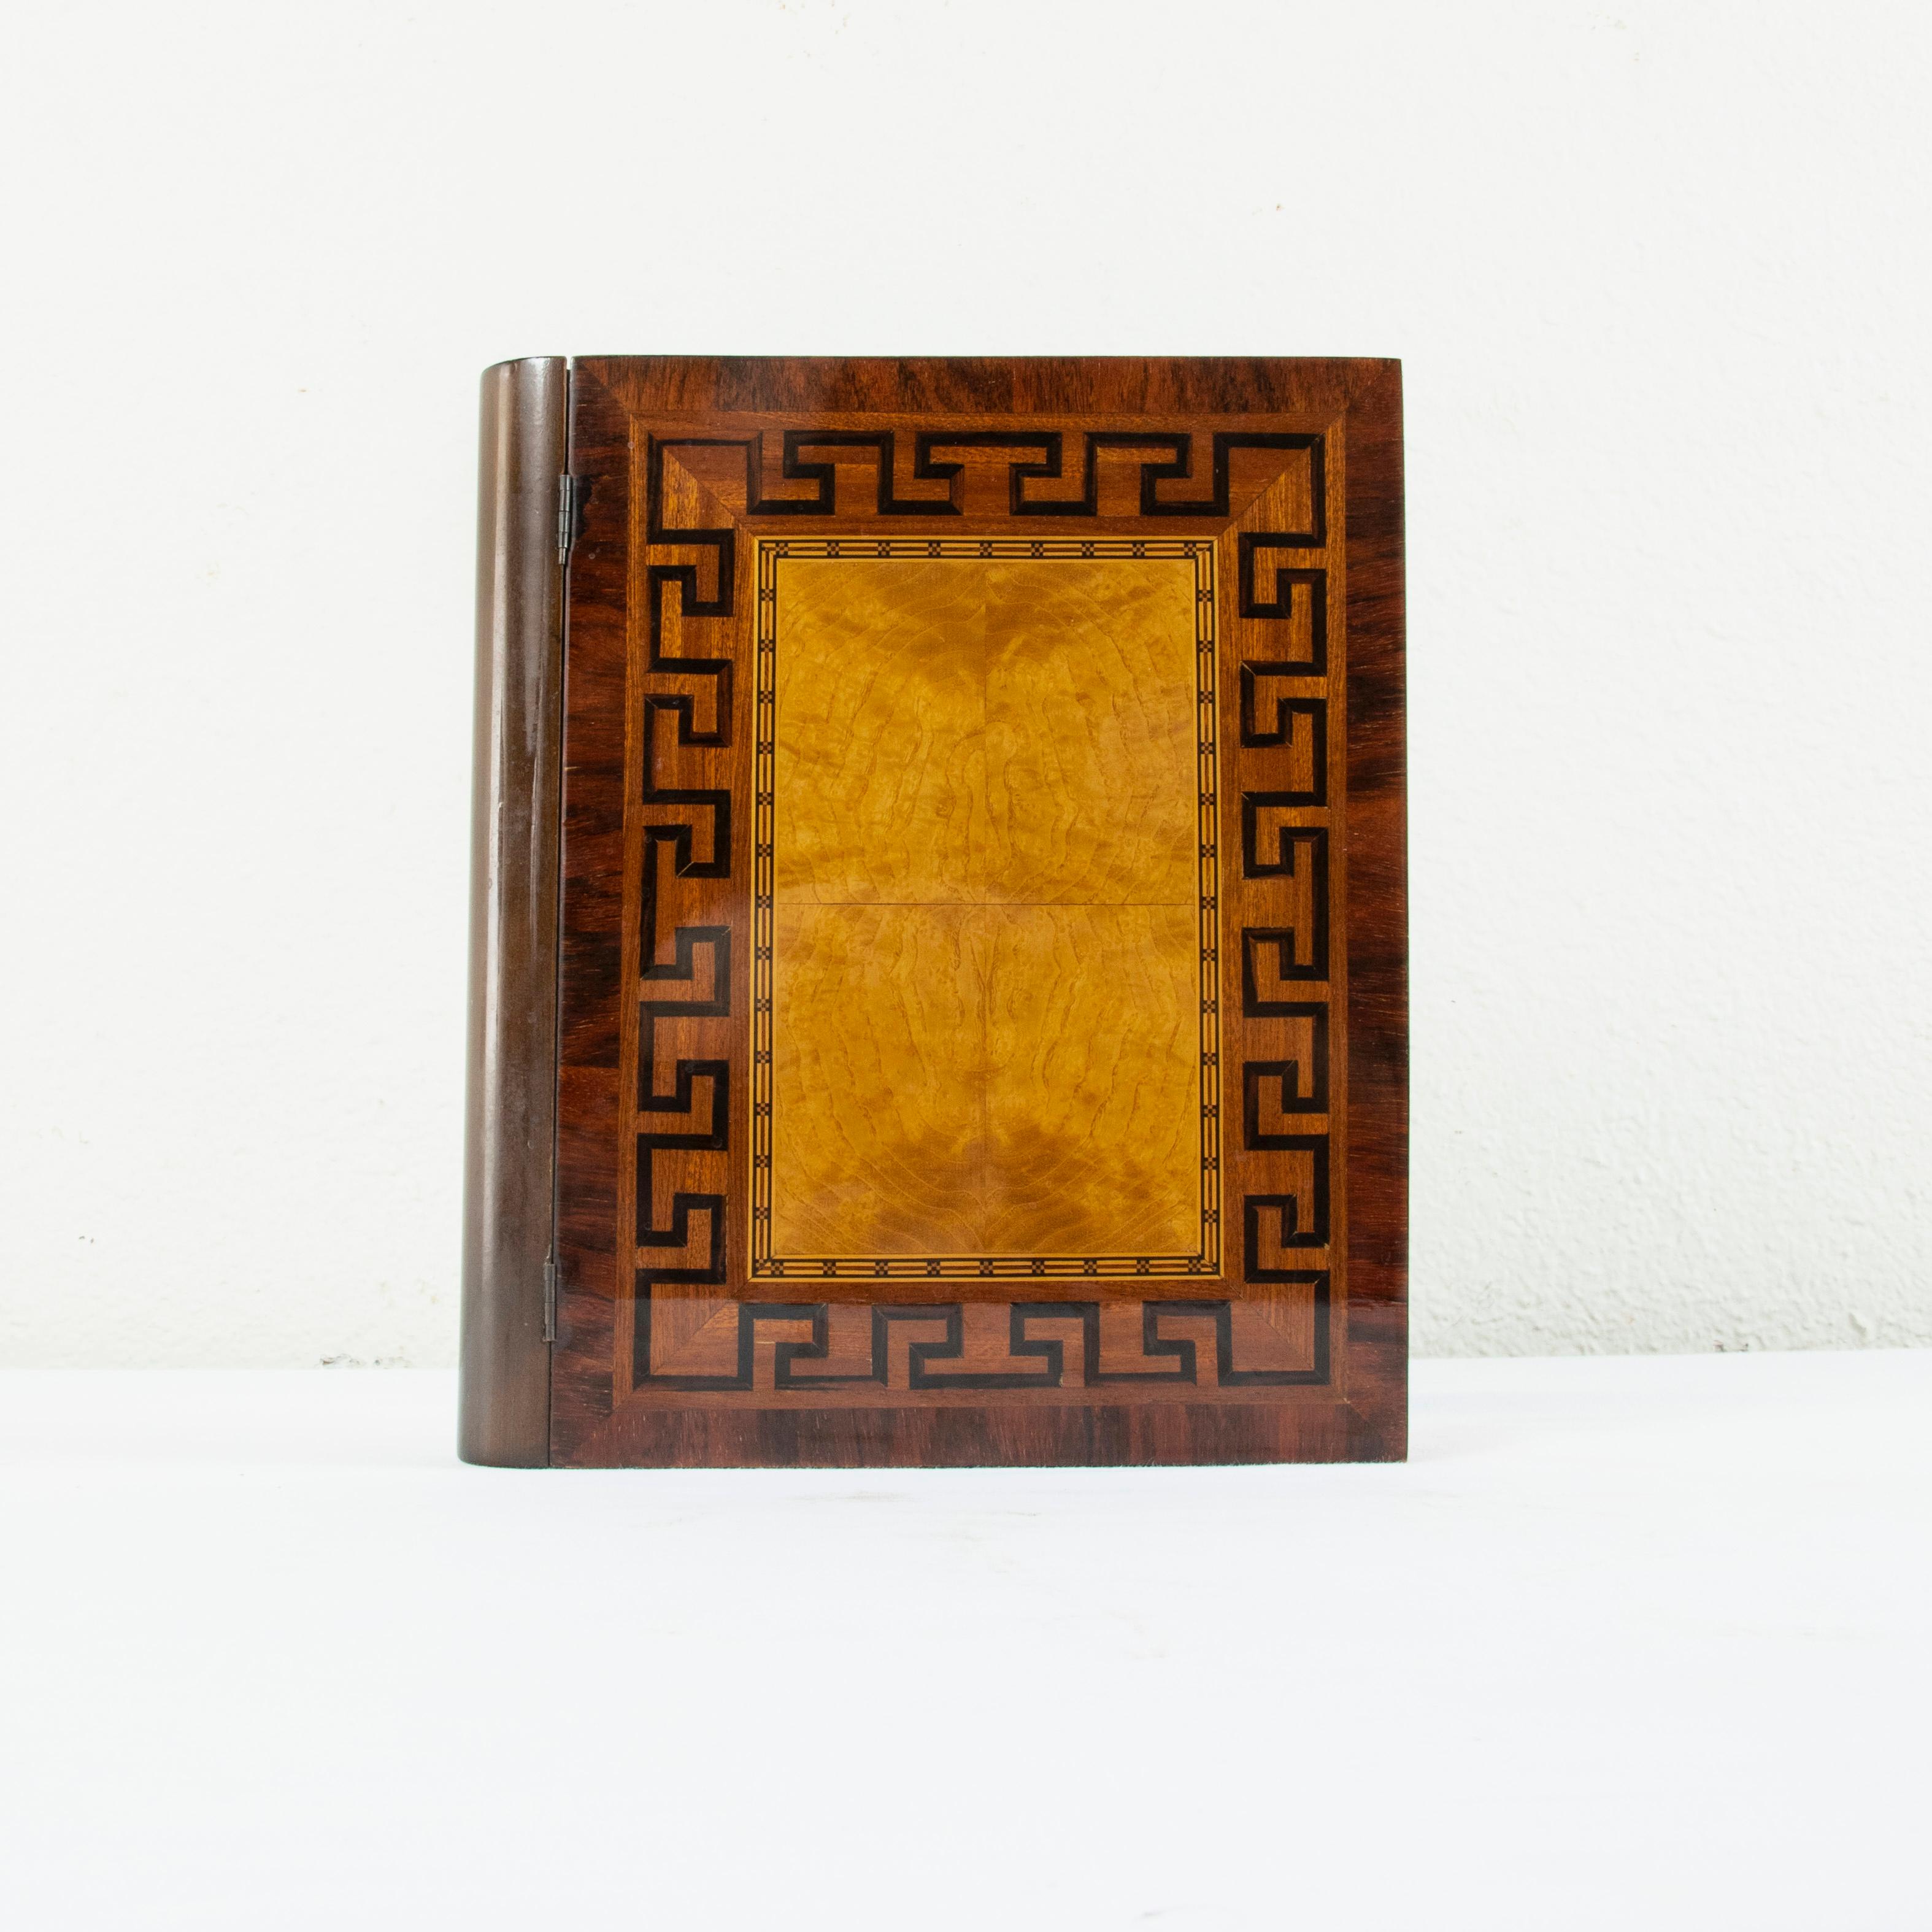 This mid-20th century French mahogany and maple marquetry box takes the shape of a large book. The lid of the box features a central square of book matched lemon wood surrounded by fine lines of lemon wood, and ebonized pear wood in a geometric